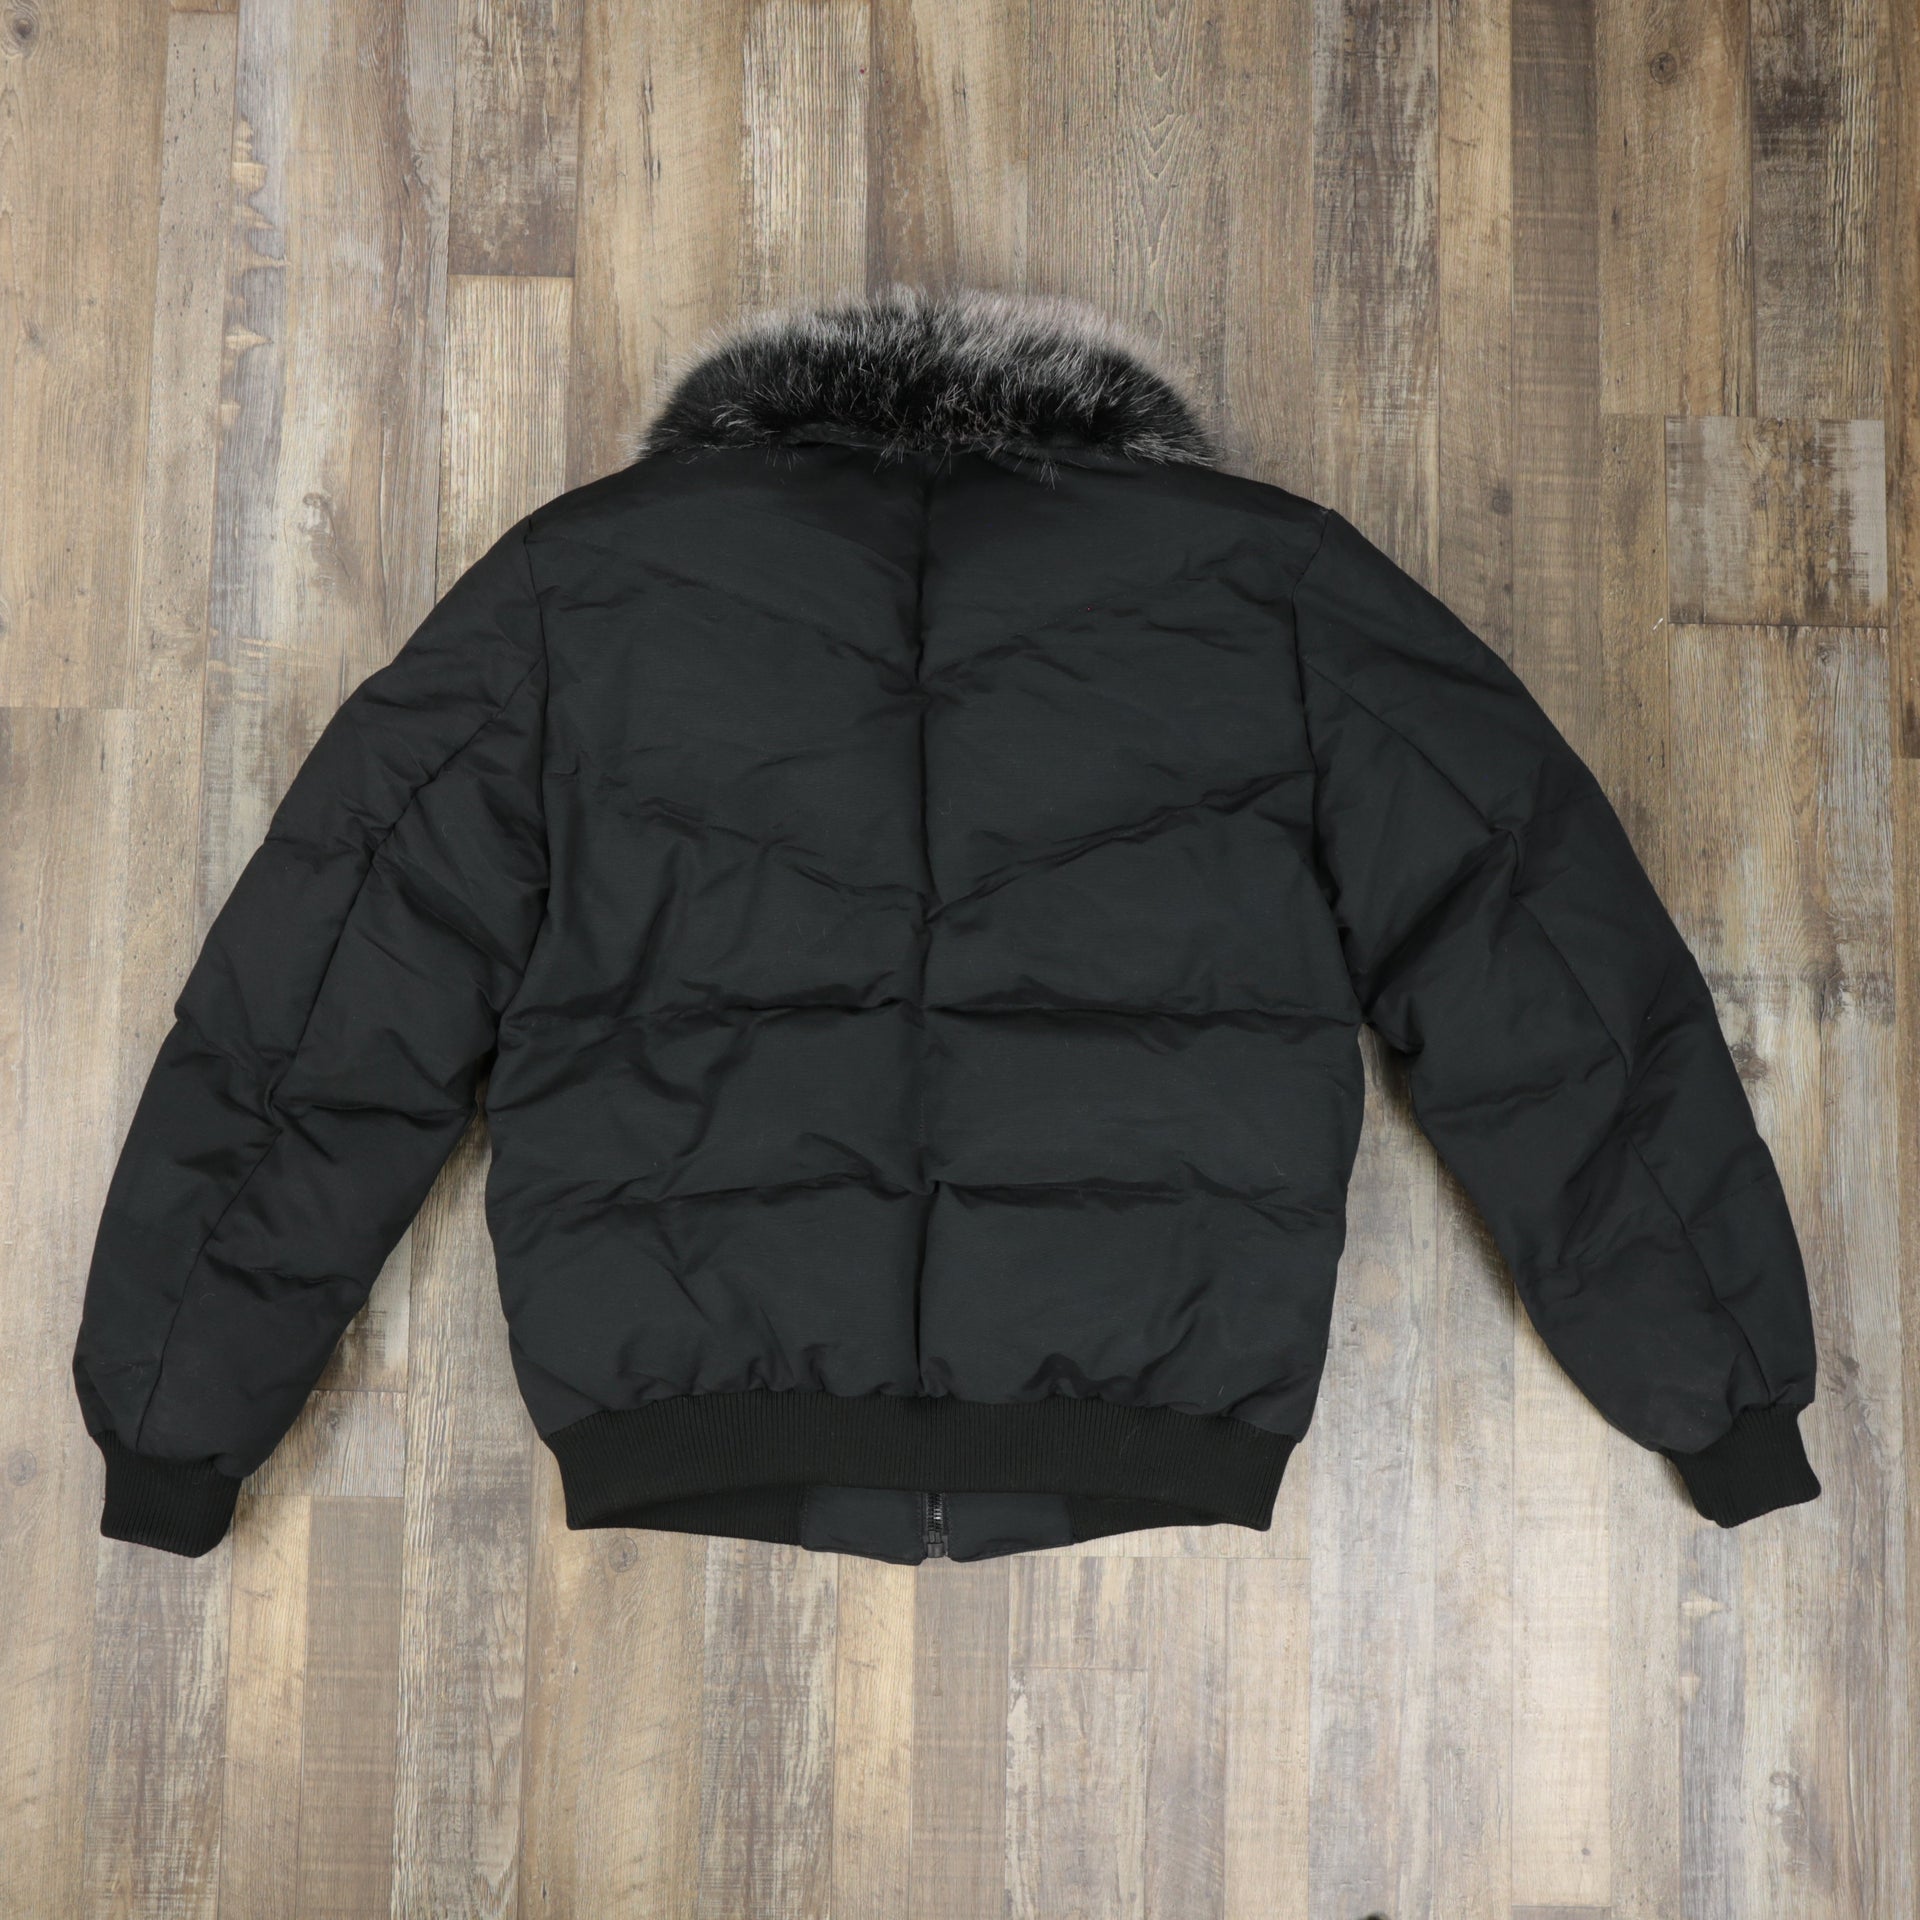 back of the jacket with no hood Men's Black Bubble Puffer Parka Jacket With Removable Faux Fur Hood (Vegan Fur)